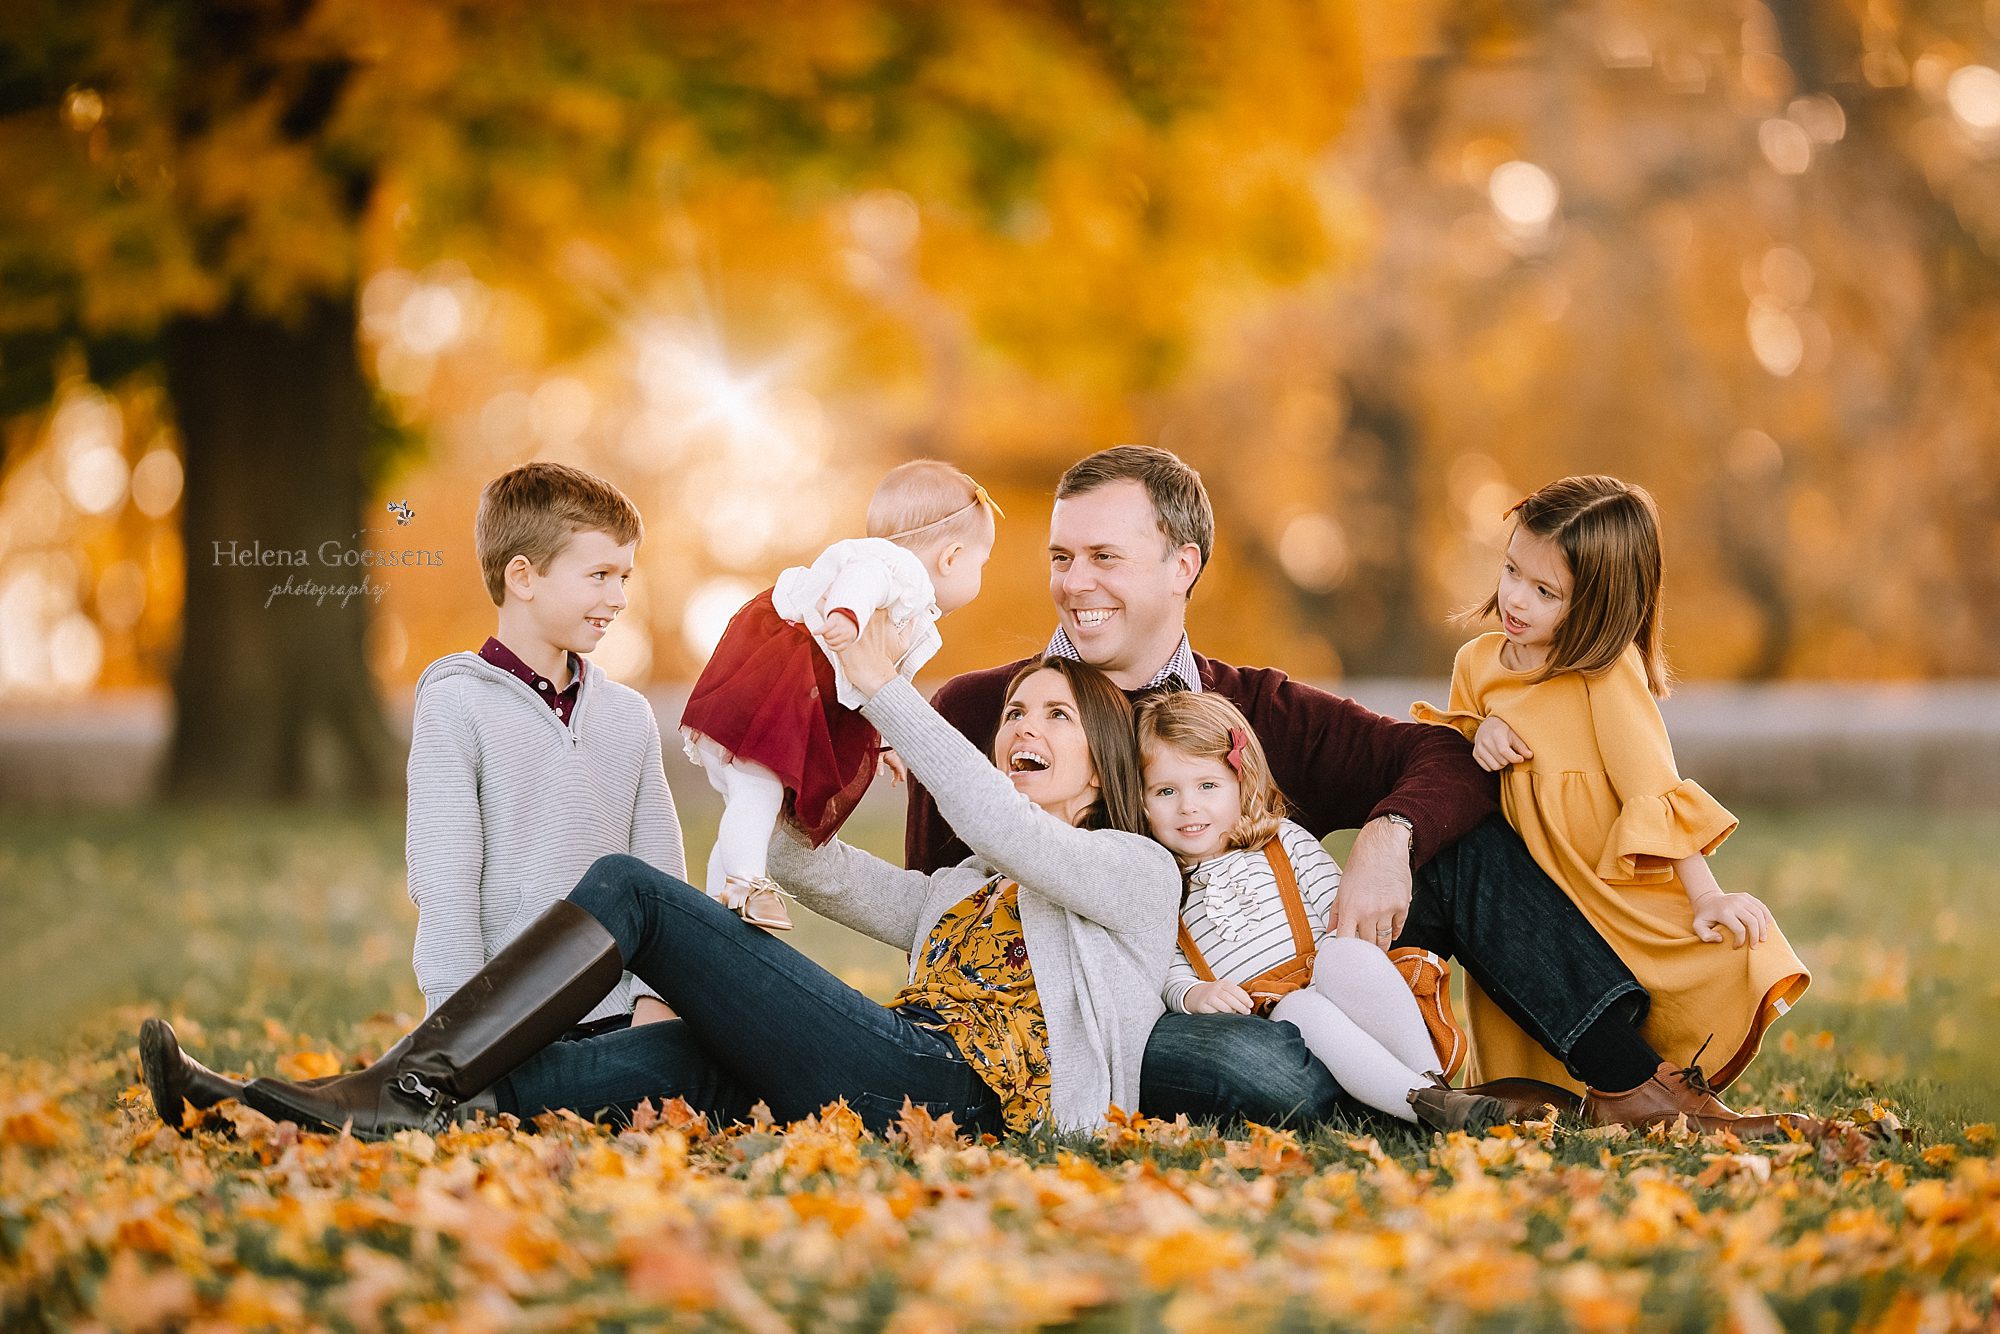 Fall family portrait session with Helena Goessens